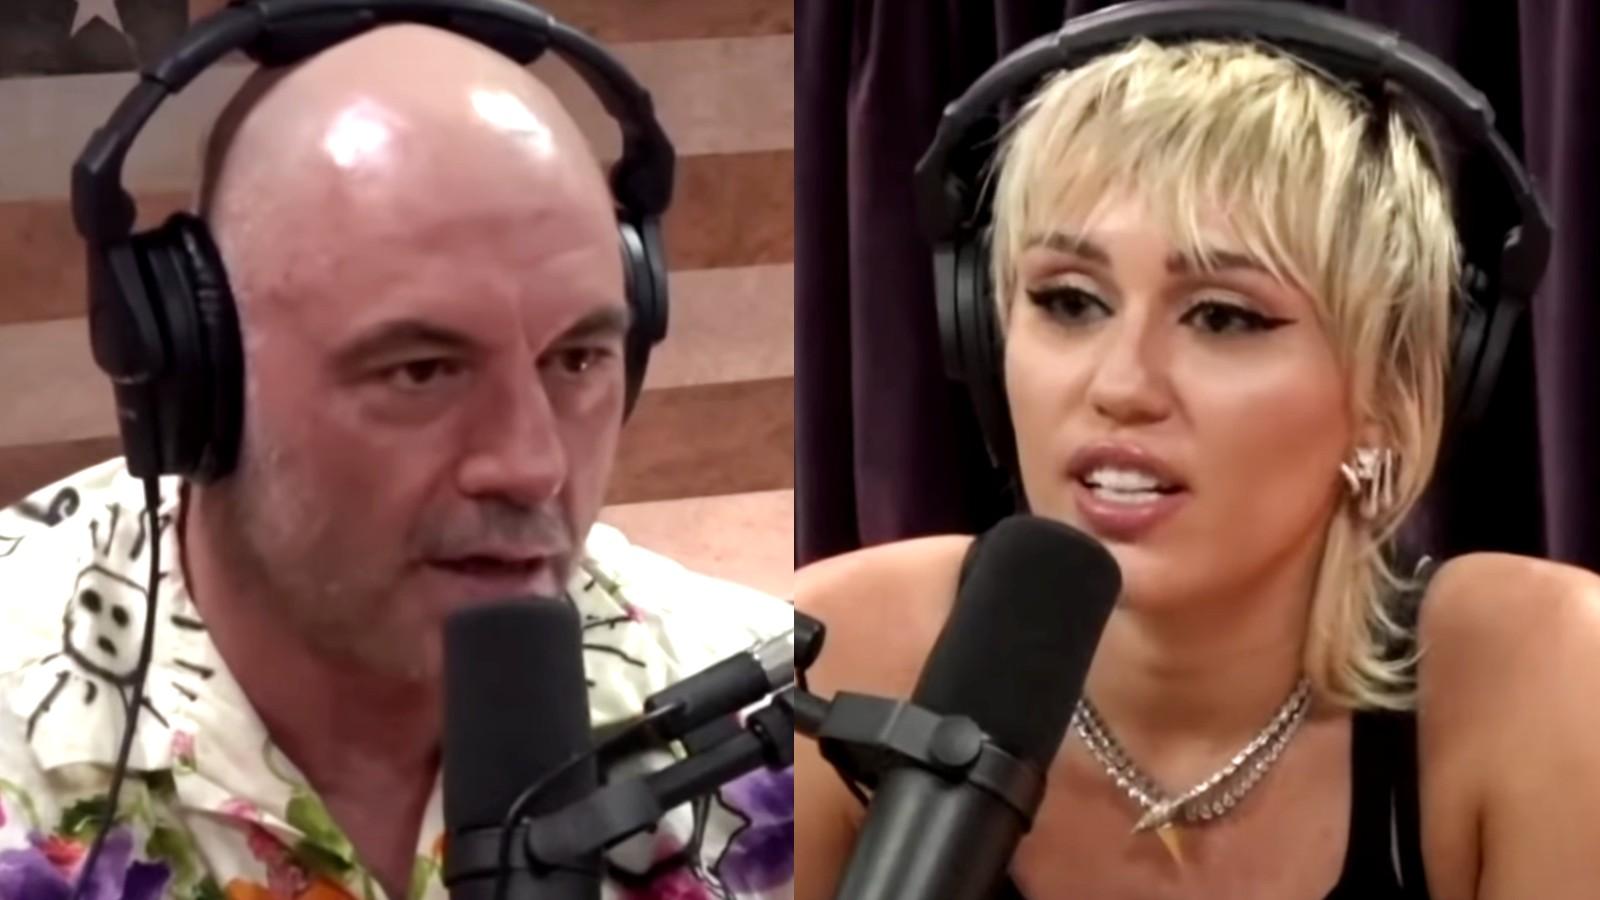 Joe Rogan and Miley Cyrus on the JRE podcast